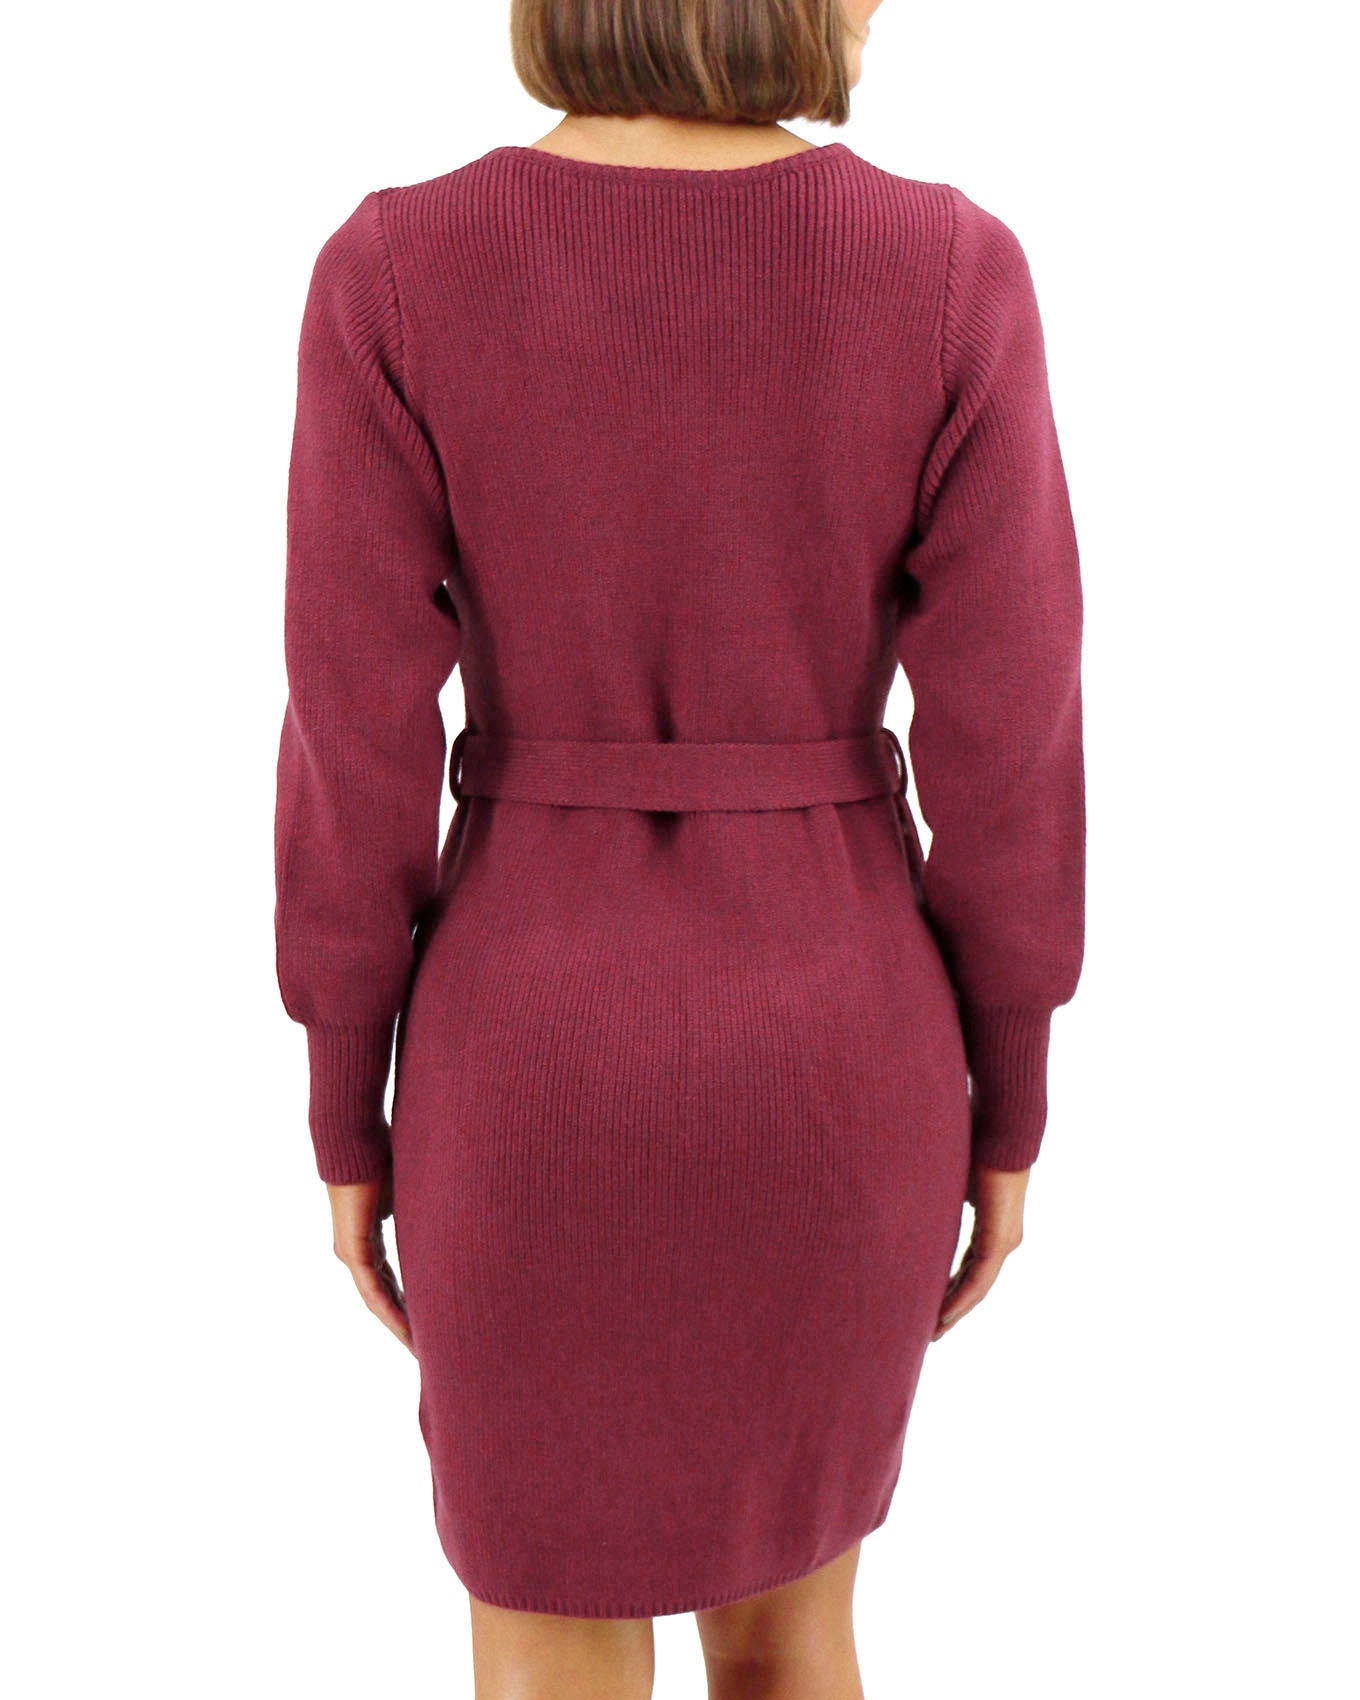 Back view stock shot of Cabernet Faux Wrap Sweater Dress